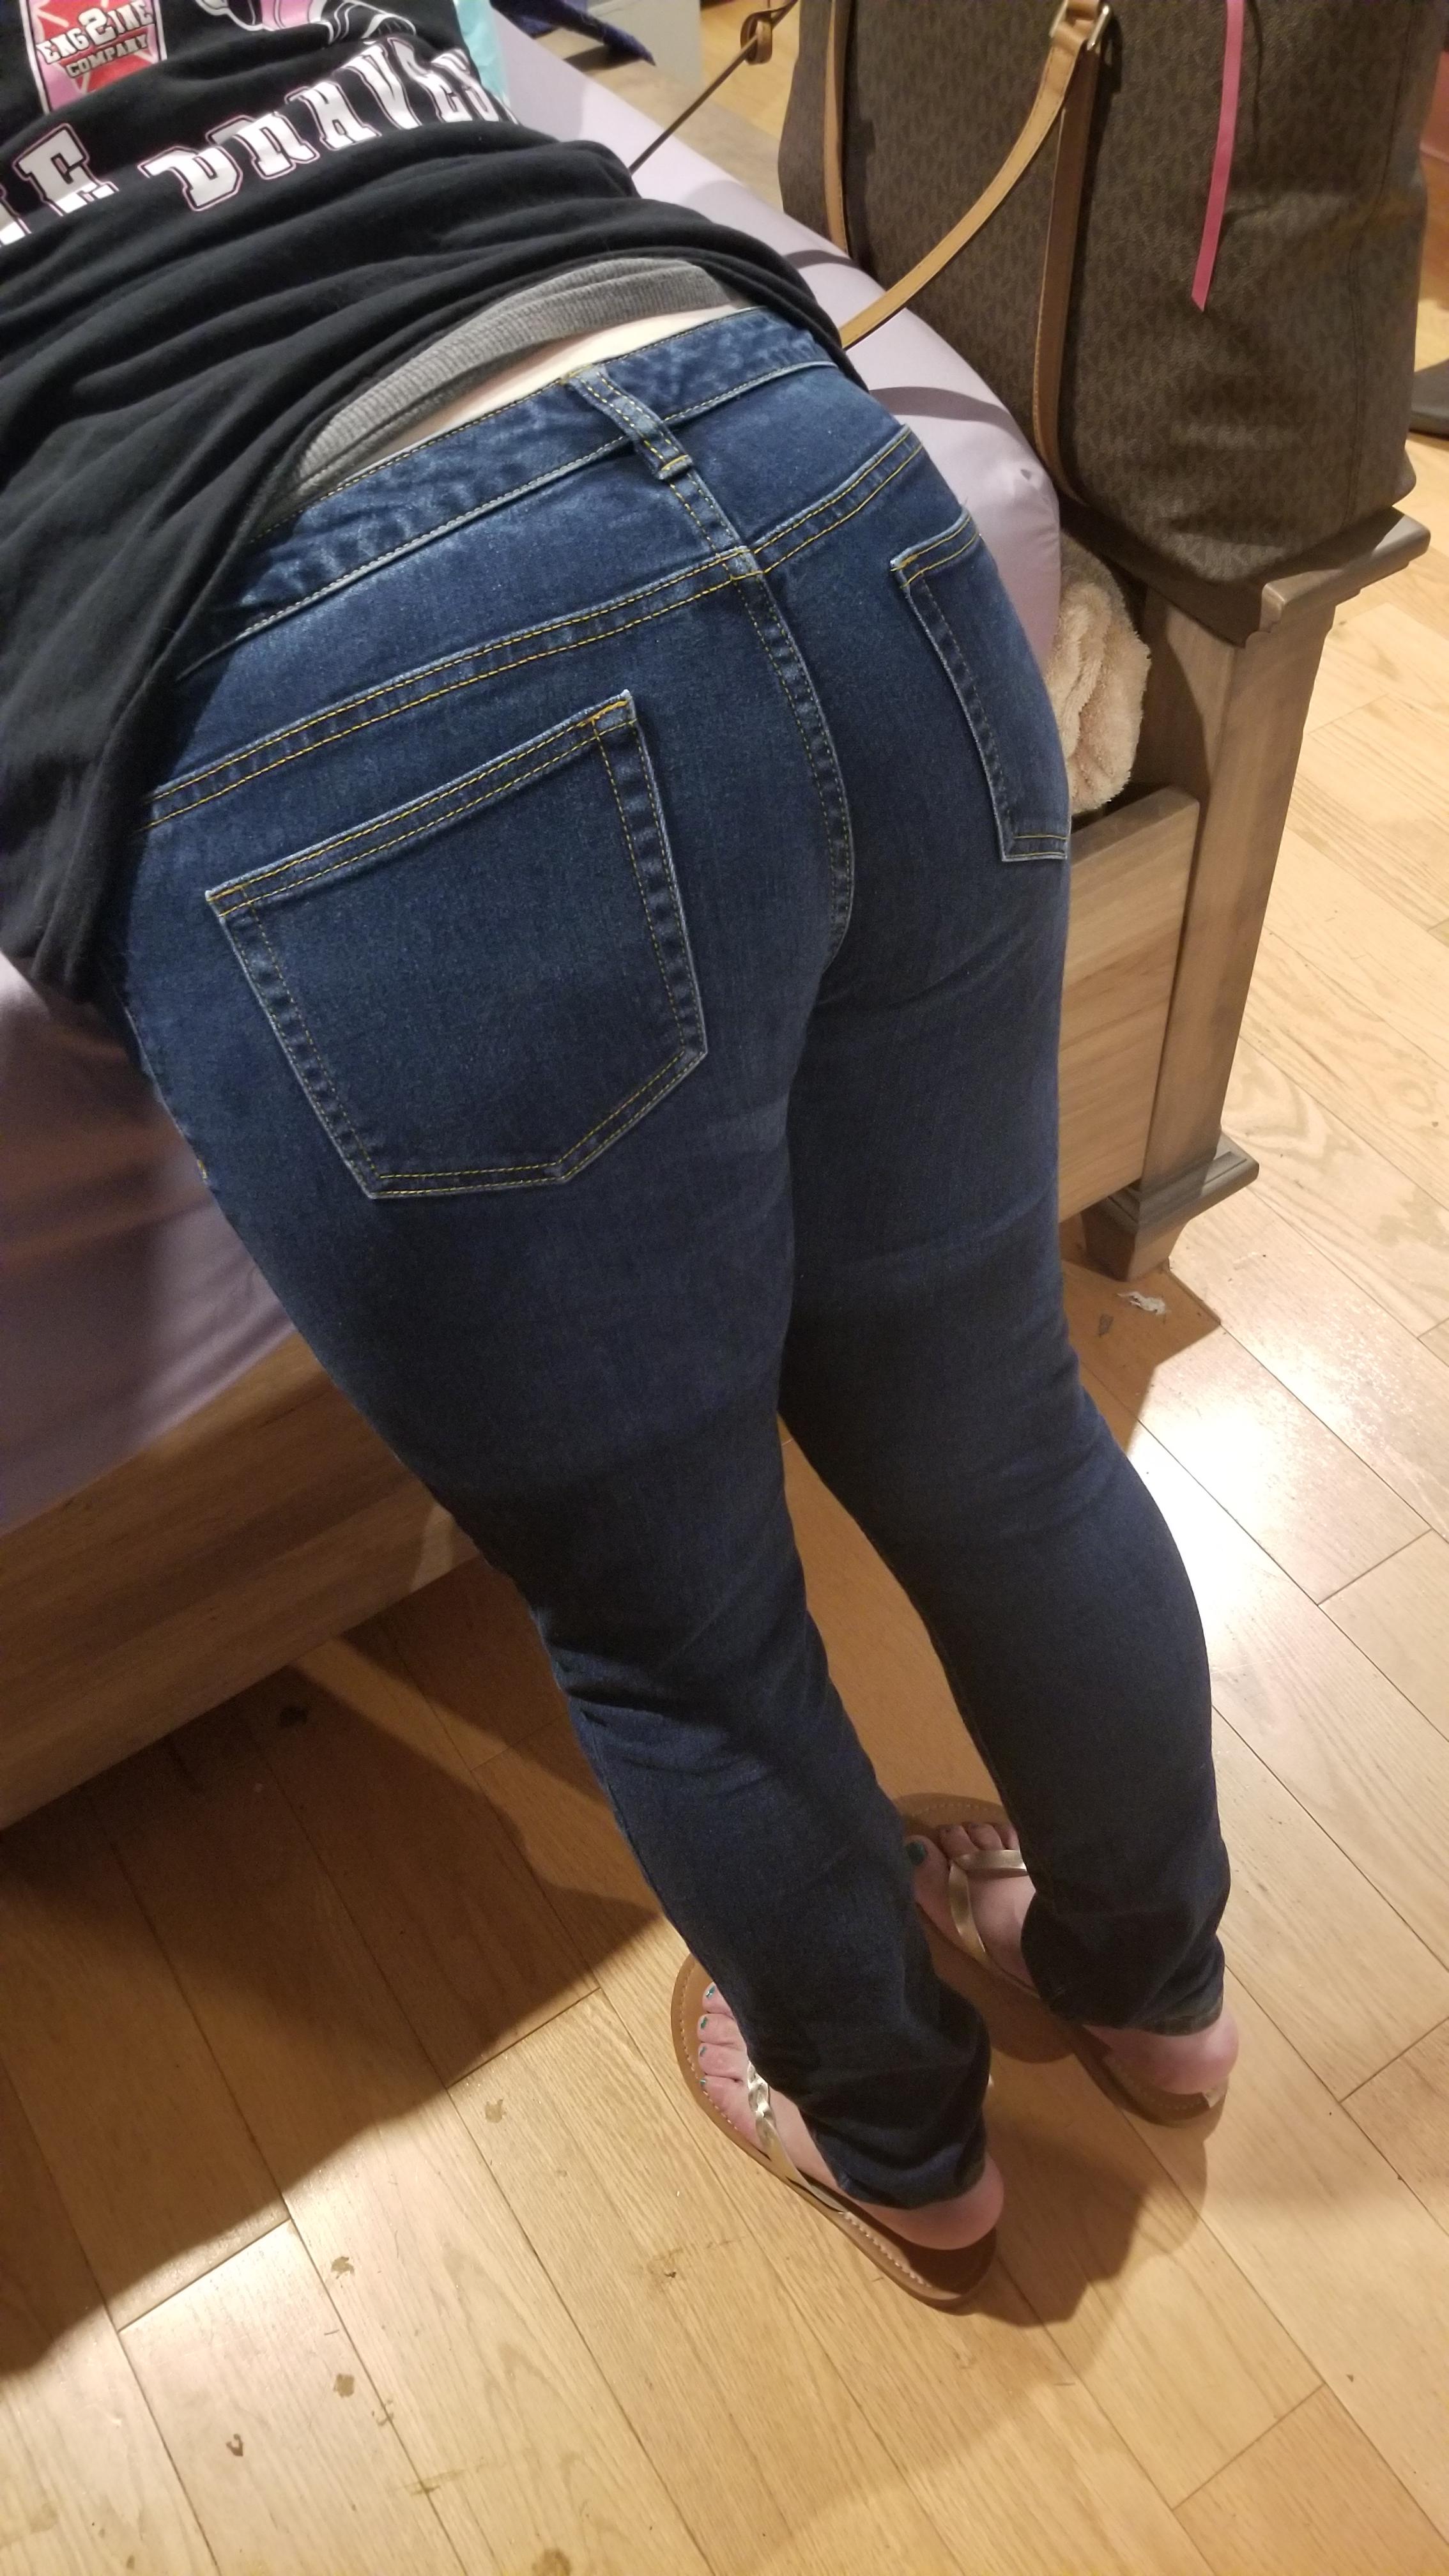 My Wife Bent Over The Bed Jeans That Make Her Ass Look Amazing